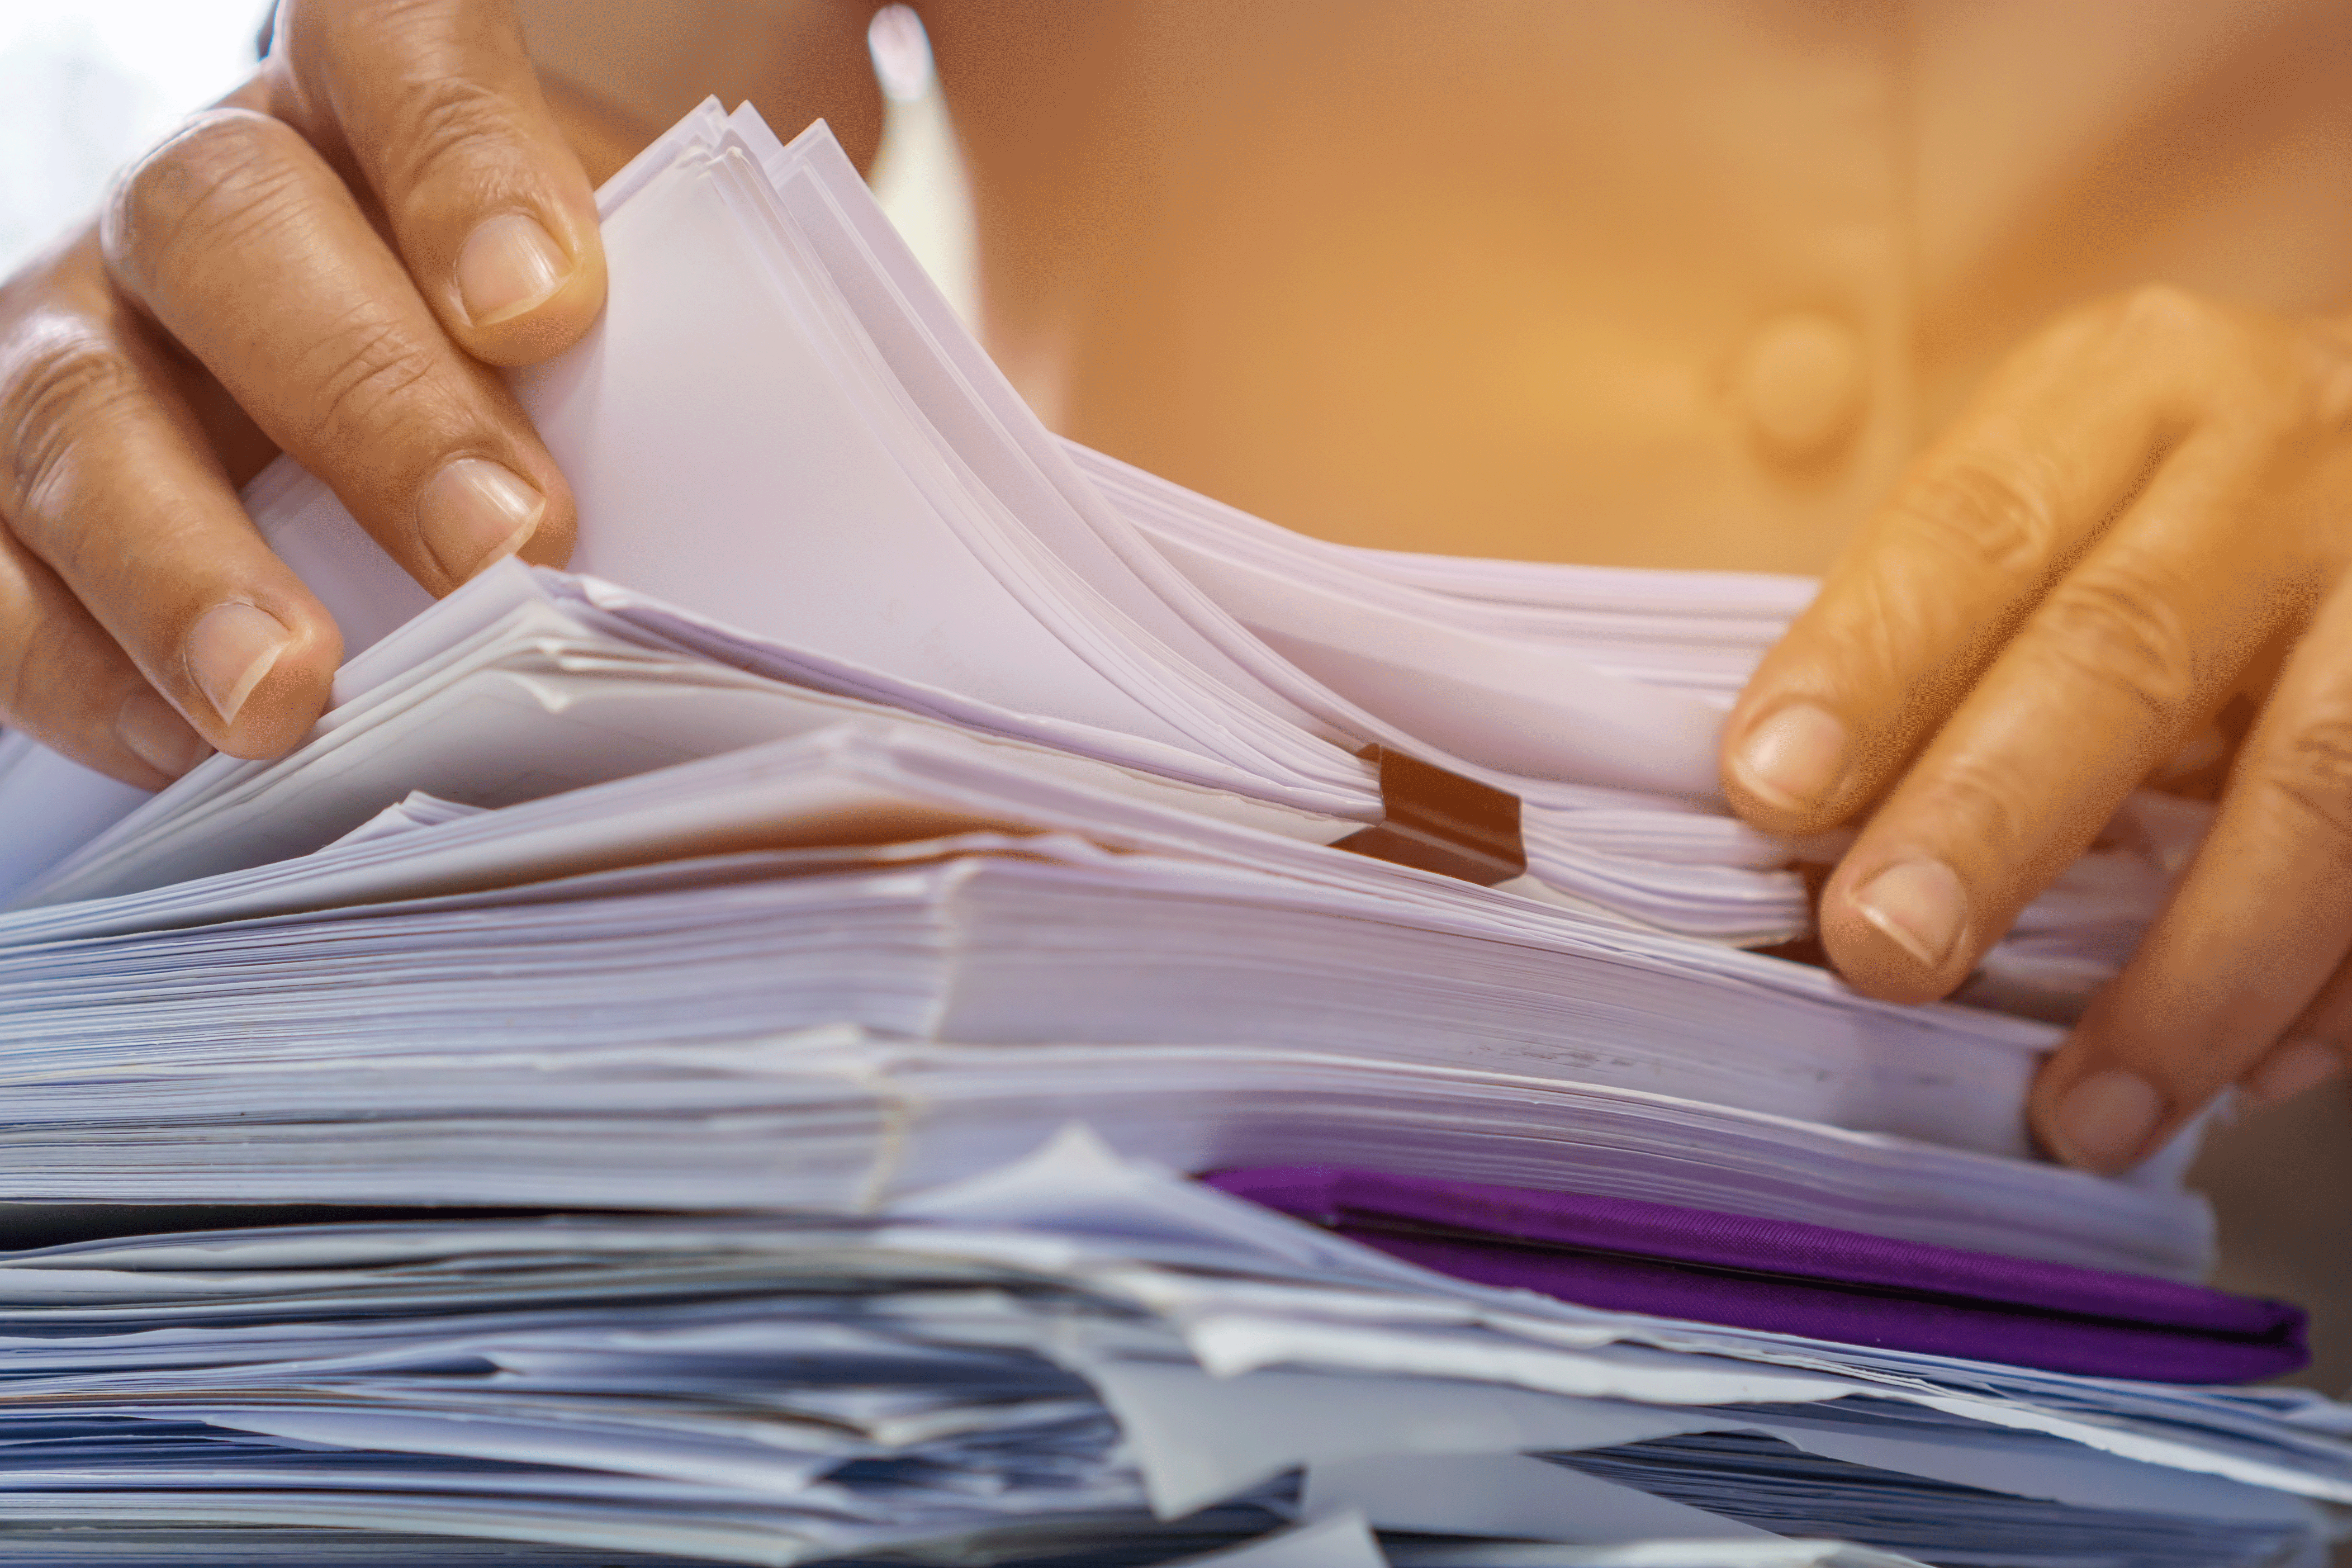 A woman sifts through a stack of papers.